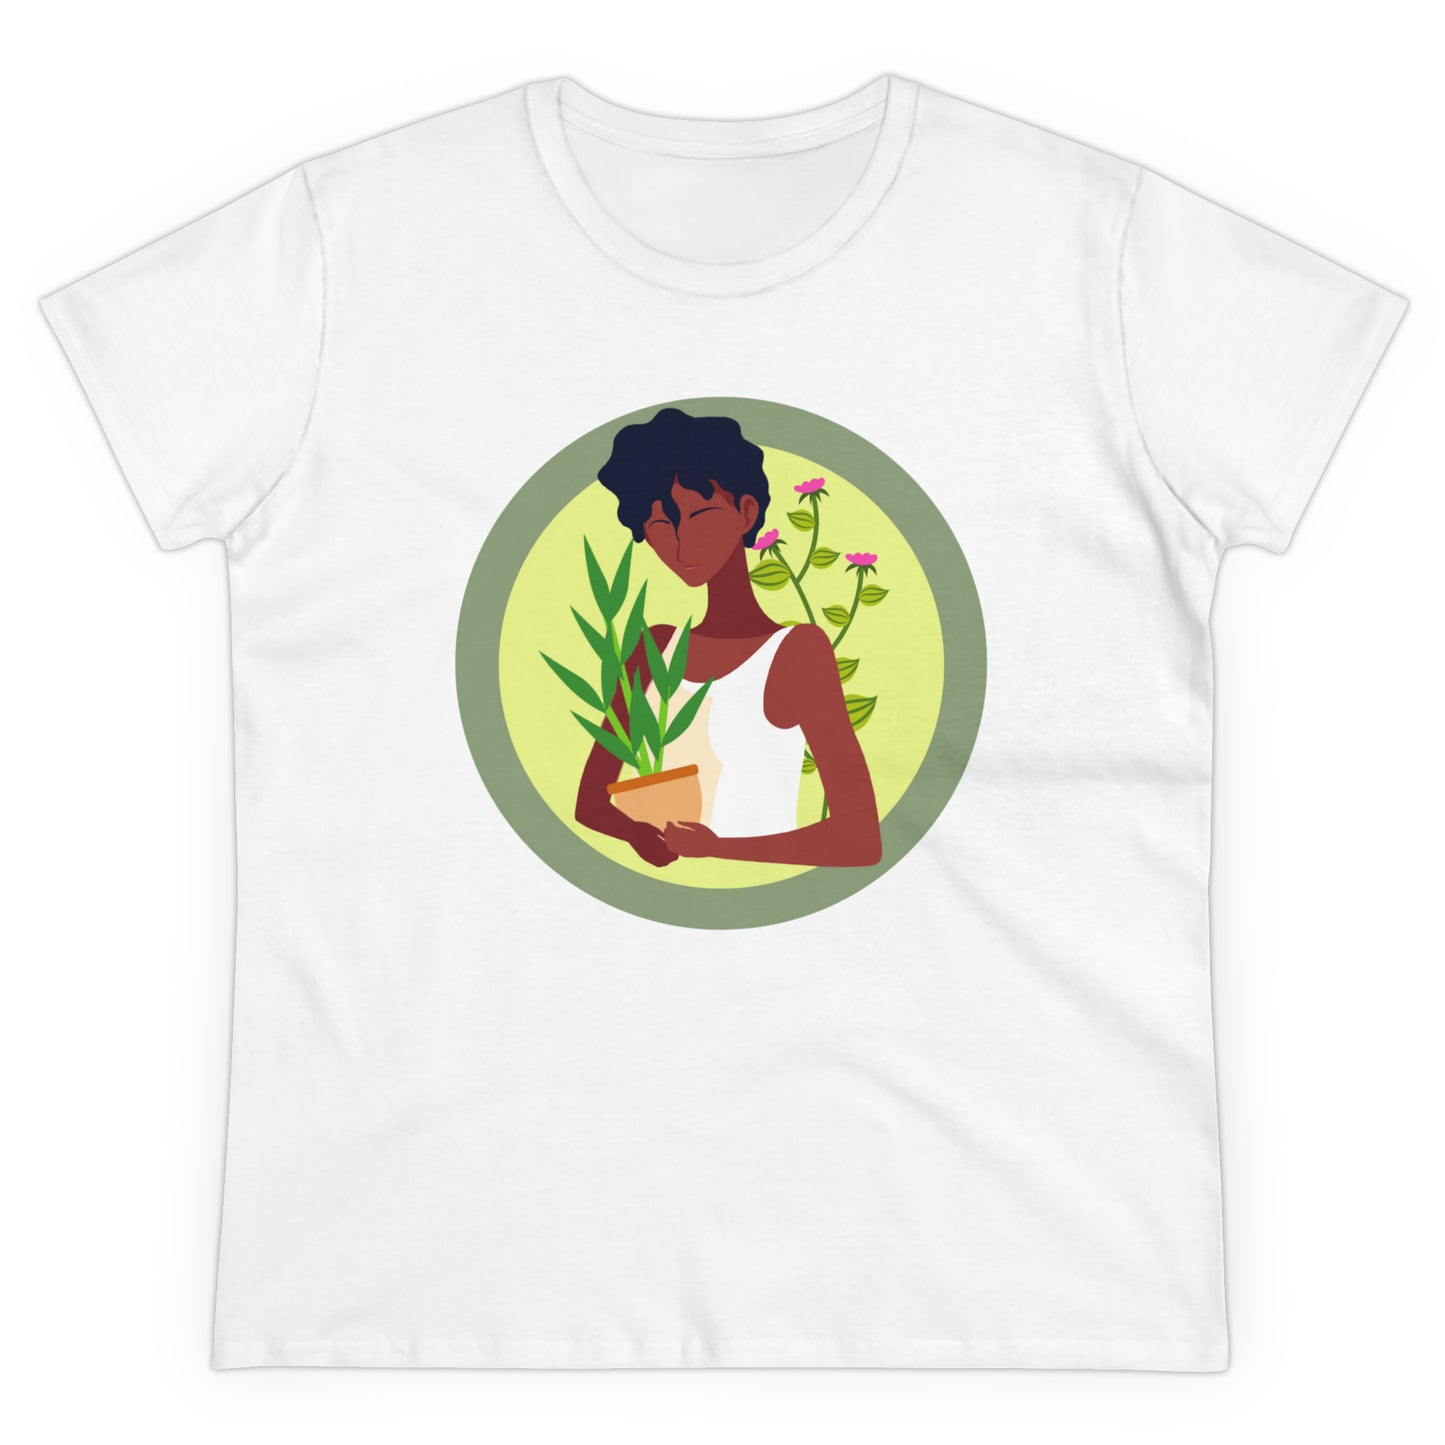 Women's Plant Mom | Plant Mother's Day Earth Lady Cotton Tee Shirt